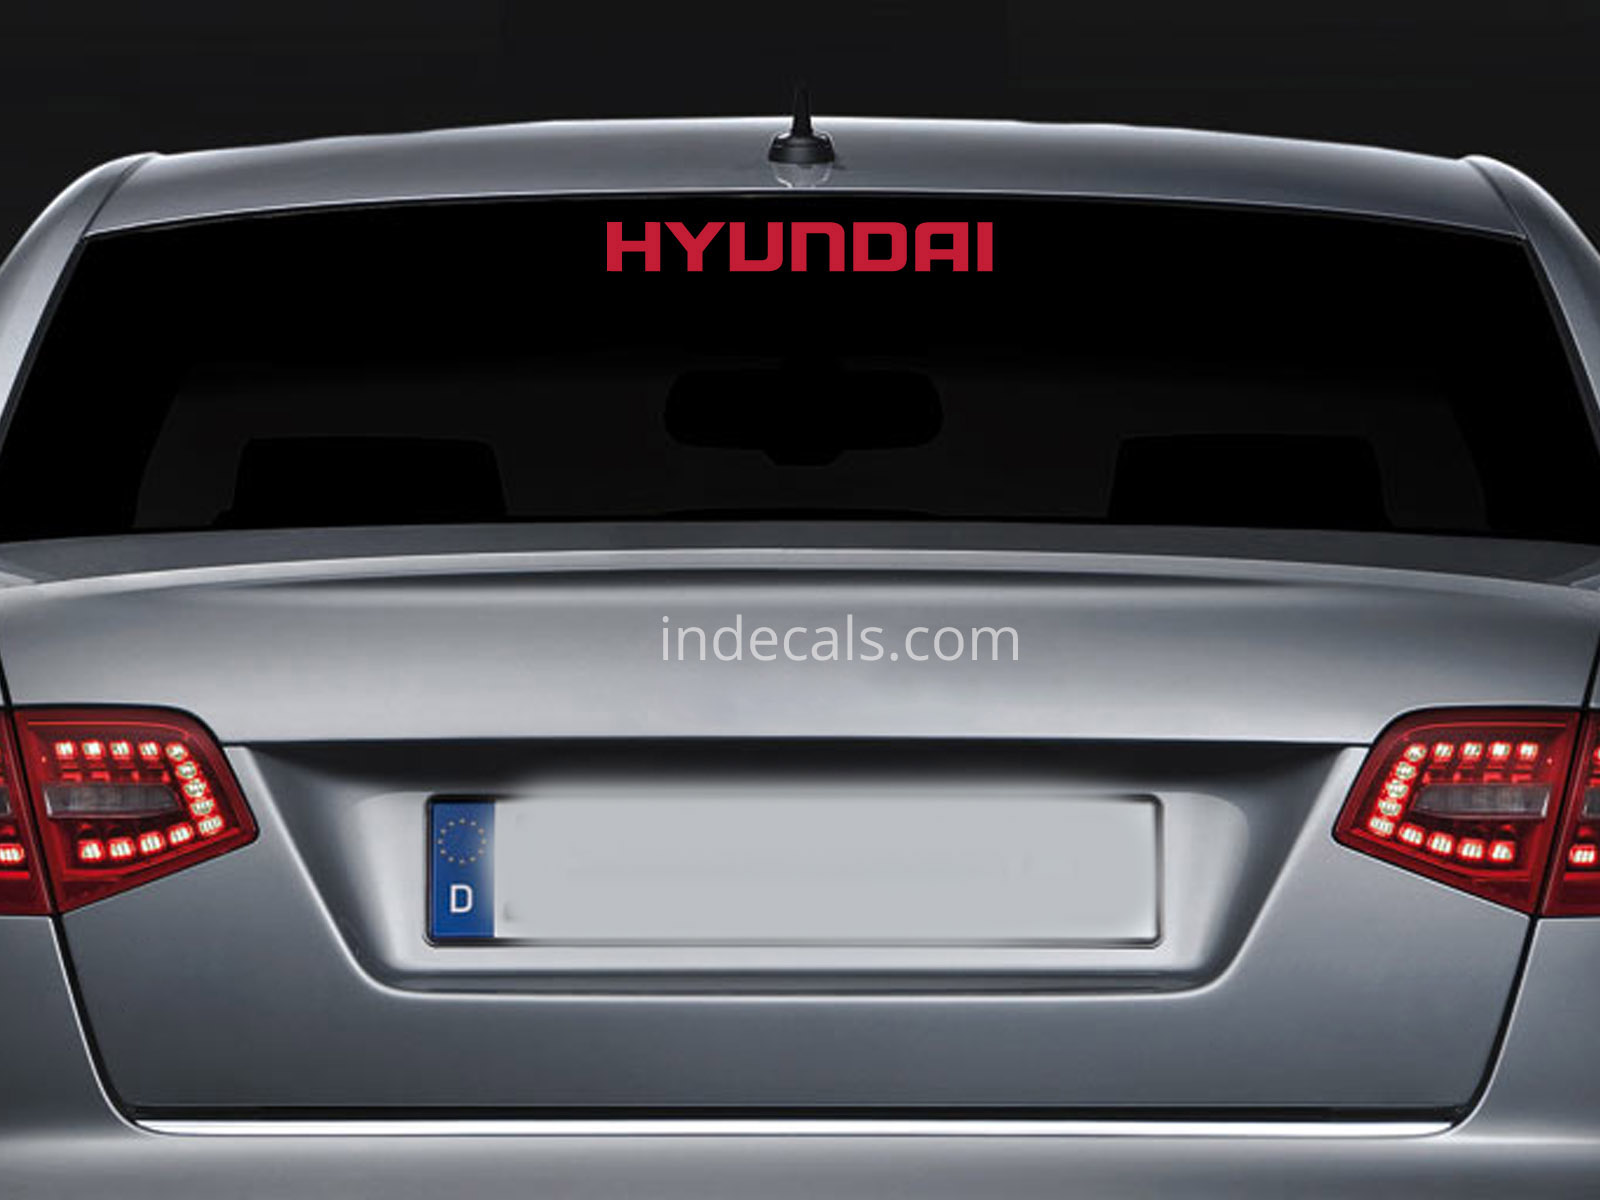 1 x Hyundai Sticker for Windshield or Back Window - Red